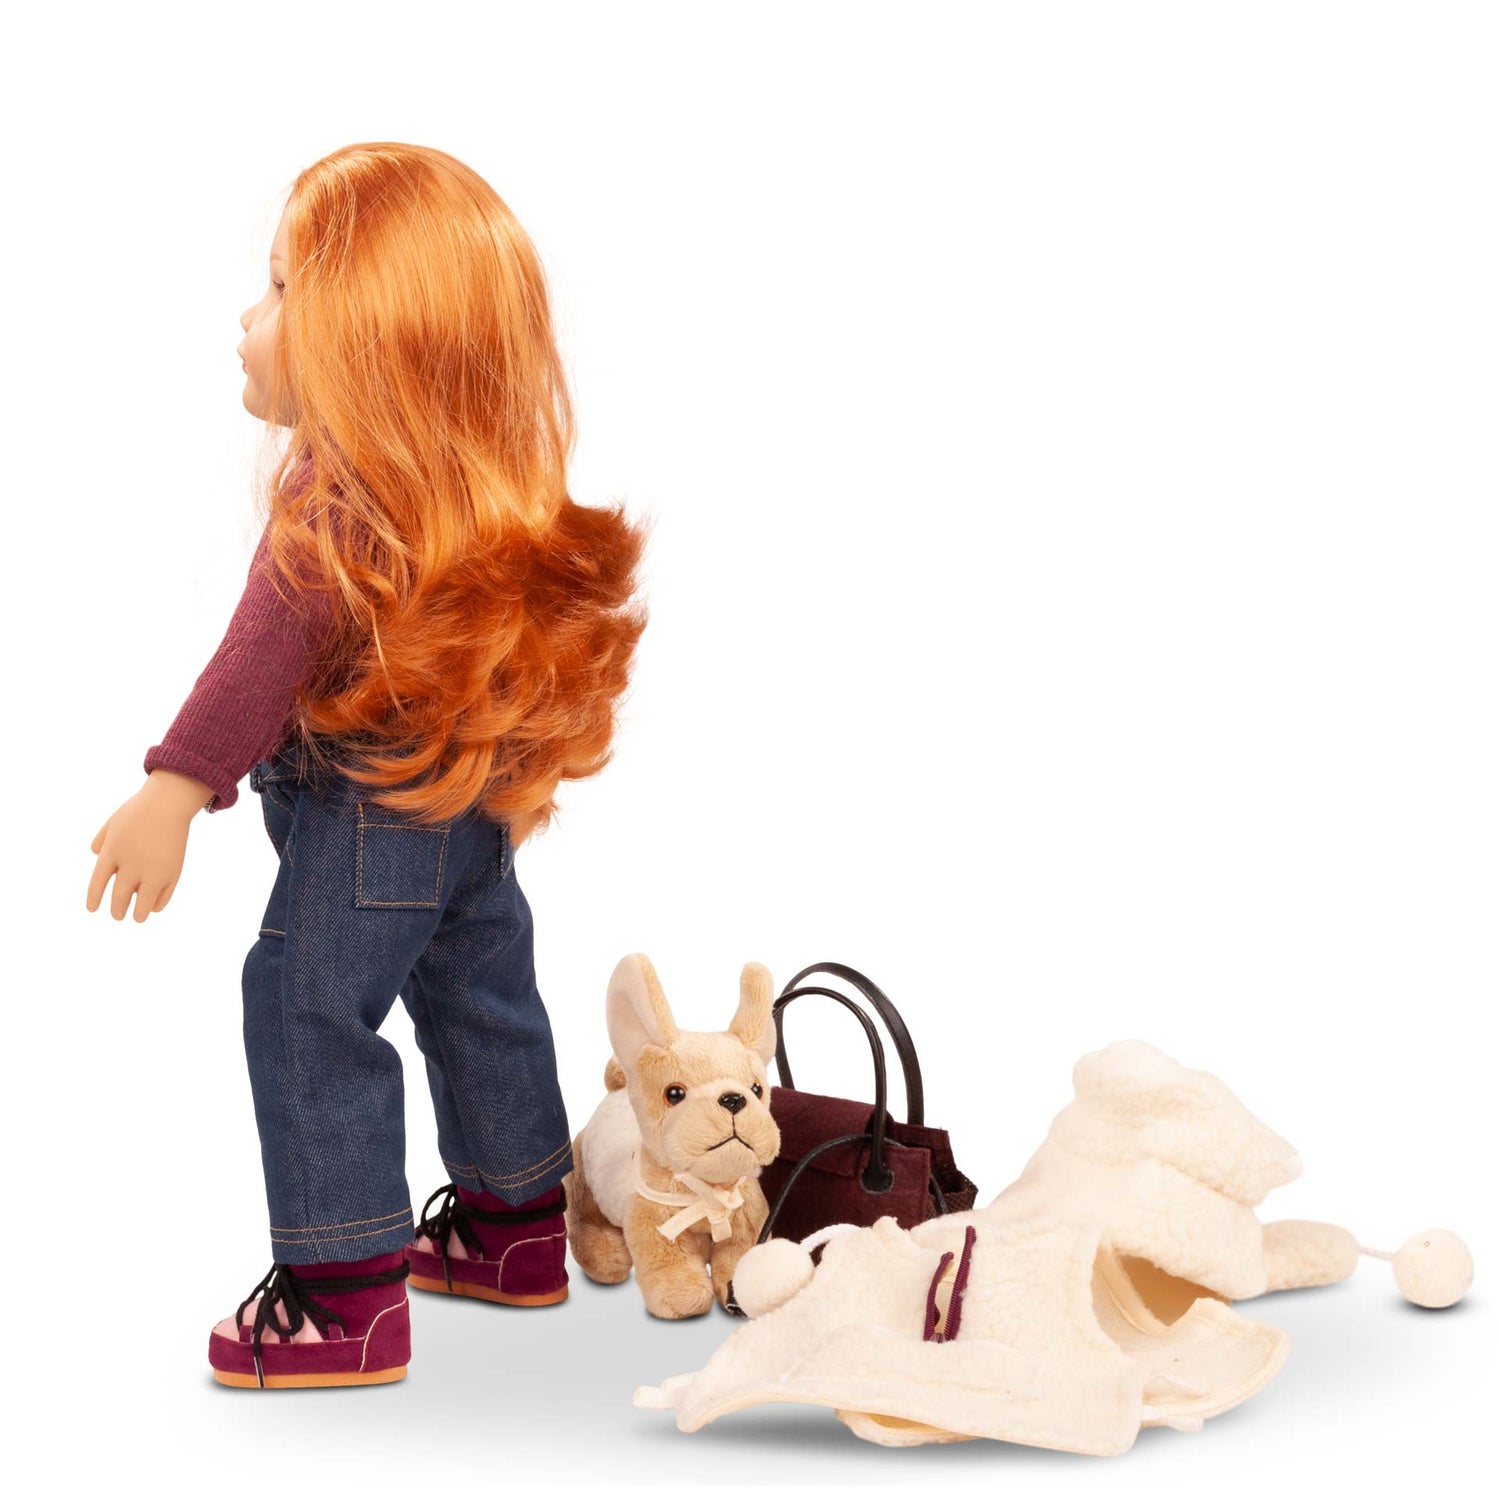 Hannah and her dog - Dolls and Accessories